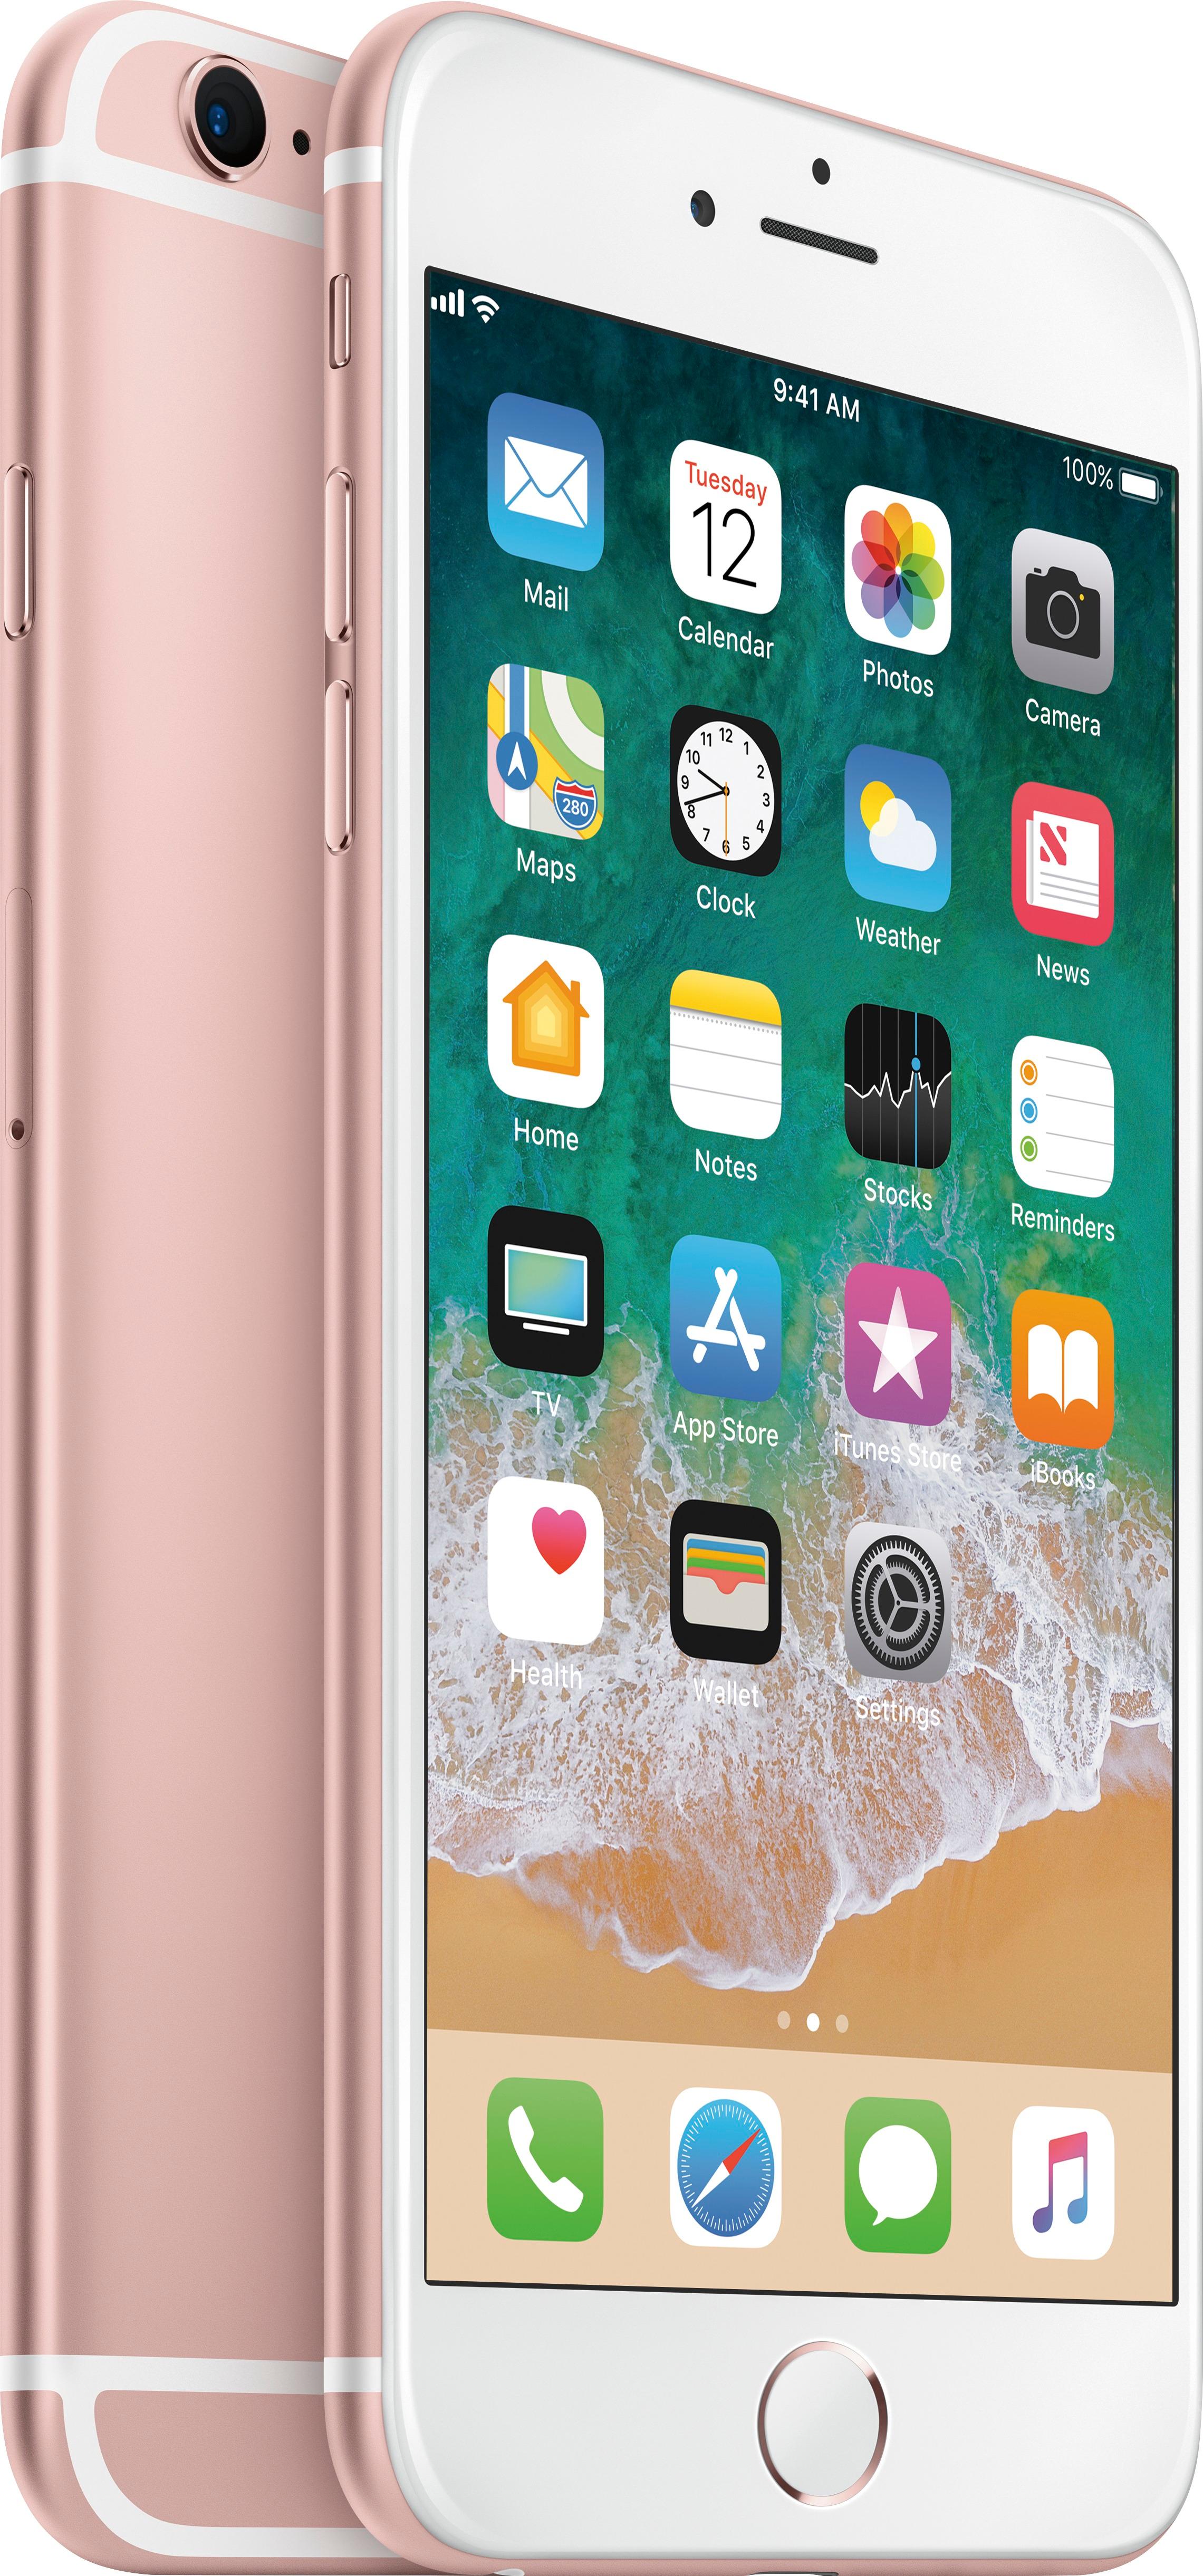 Customer Reviews: Apple iPhone 6s Plus 16GB Rose Gold (AT&T) MKTP2LL/A ...